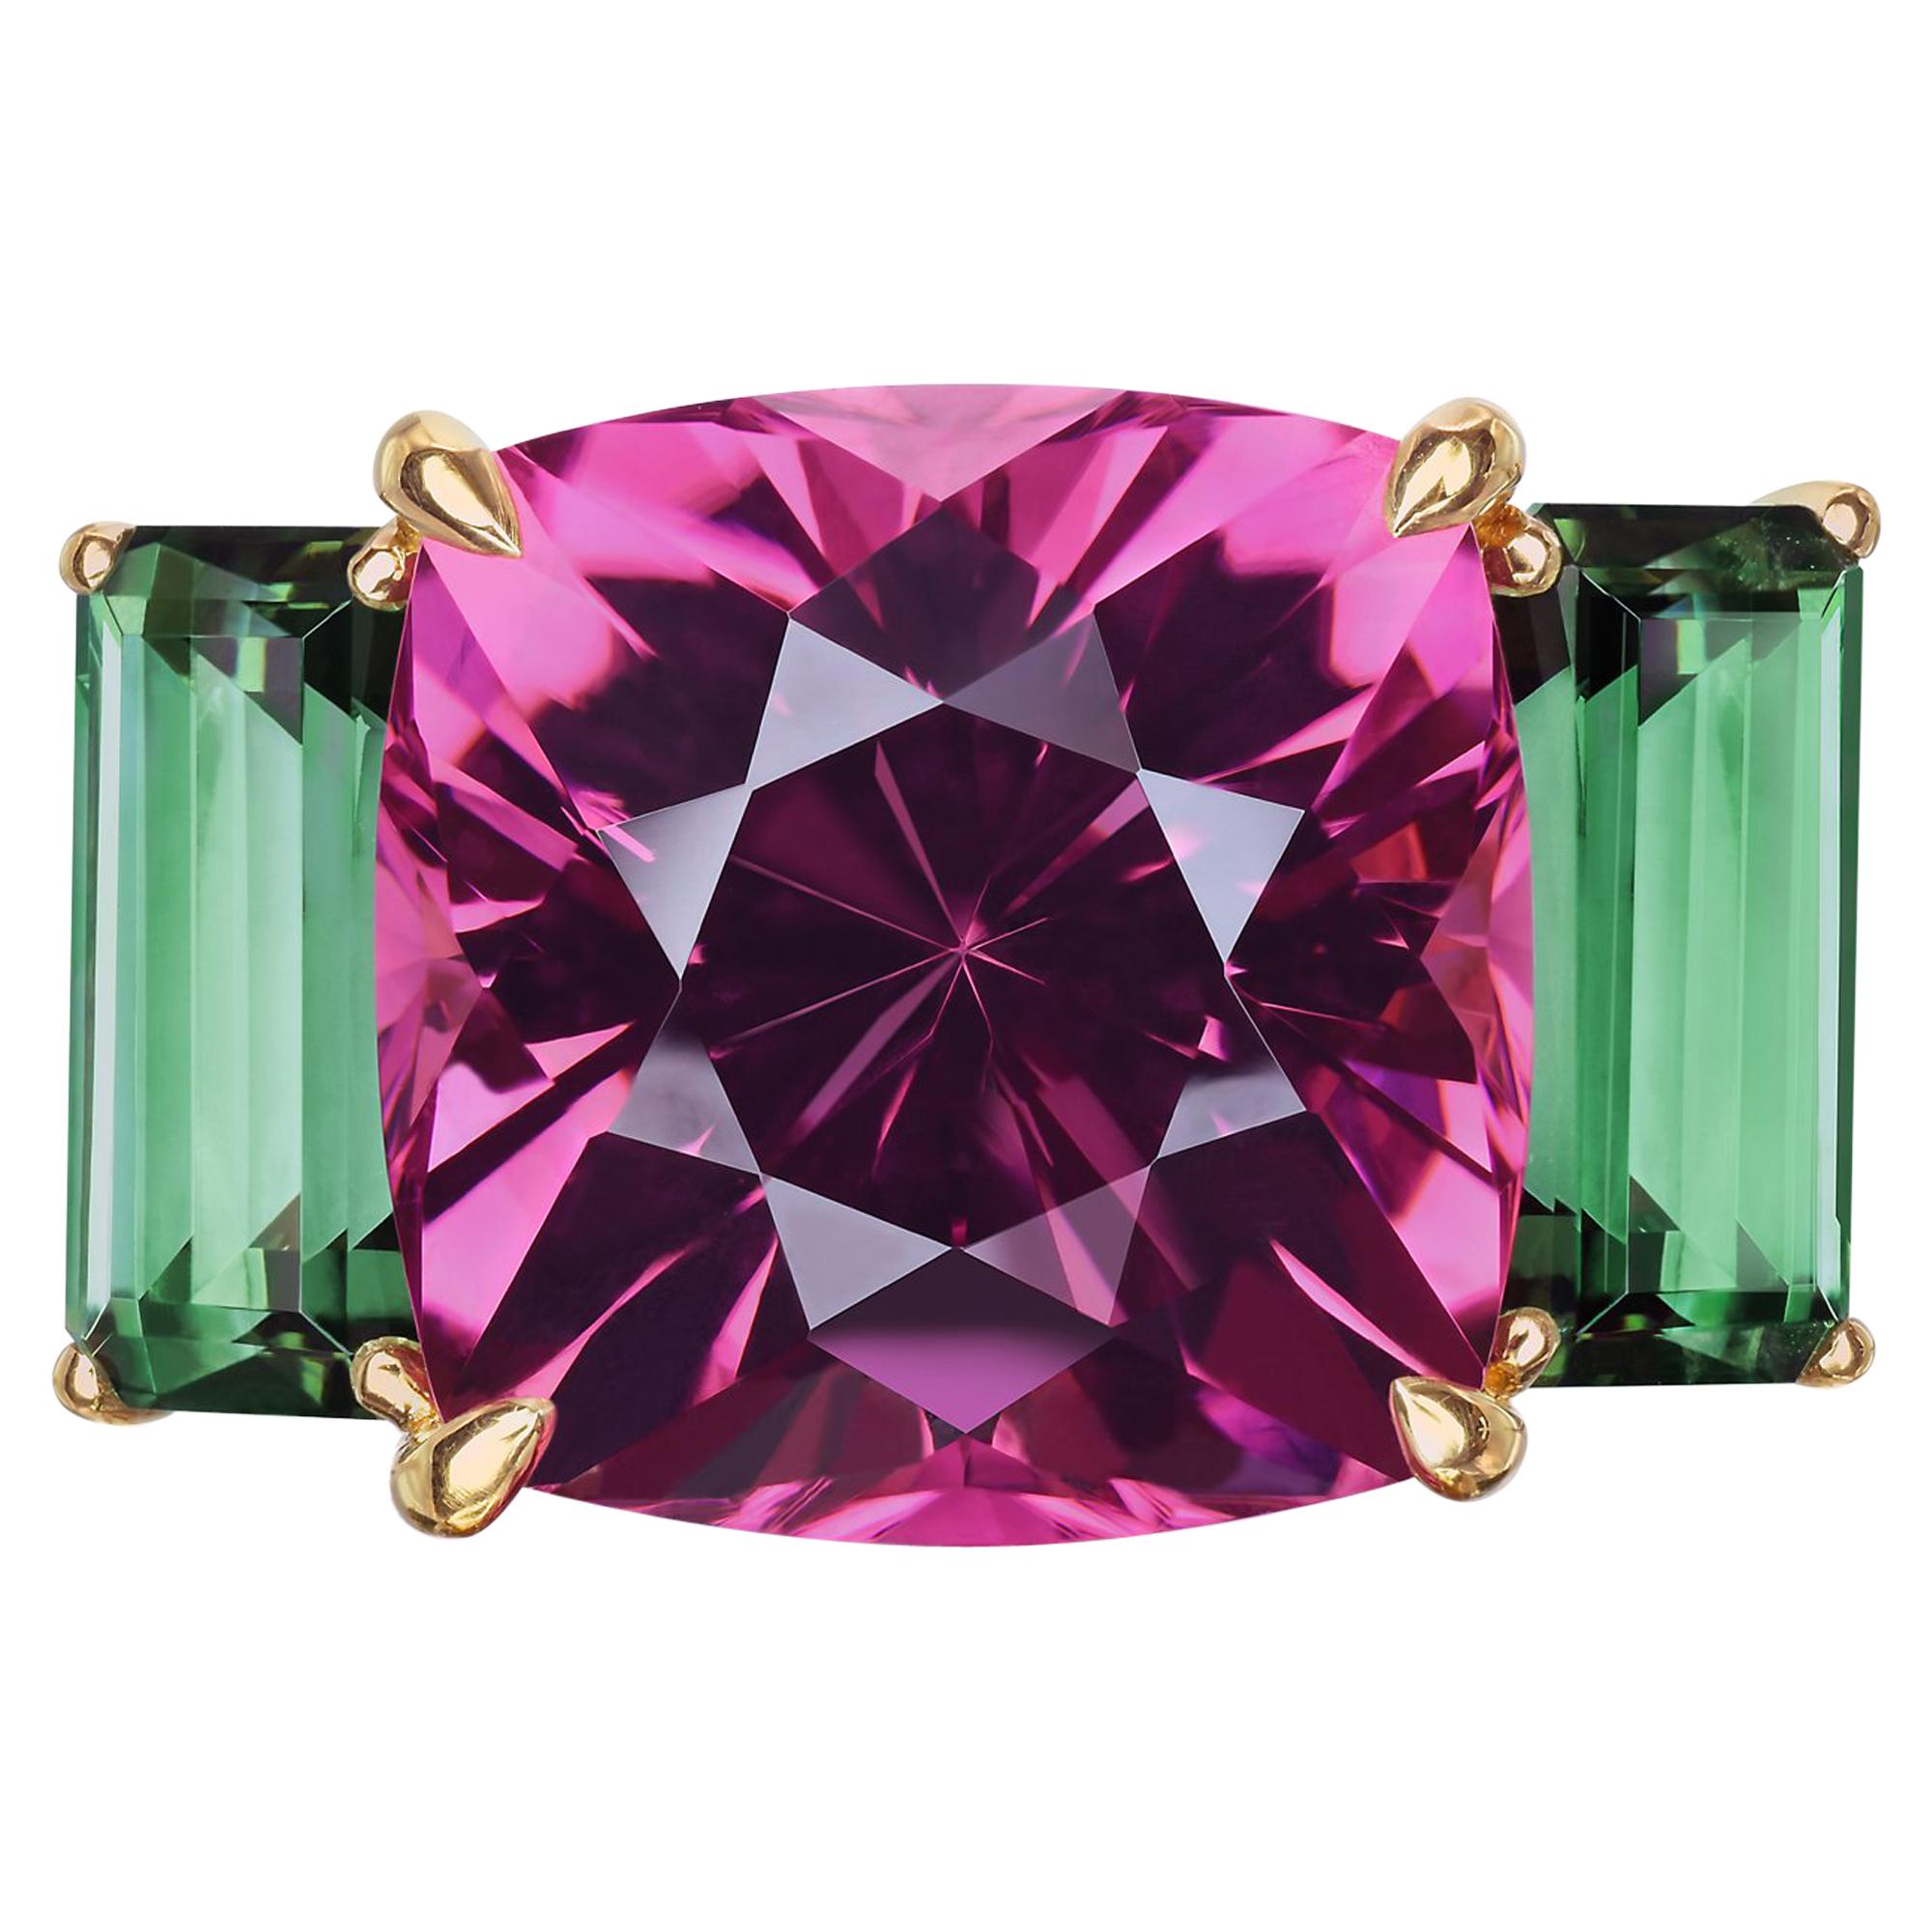 Paolo Costagli Change of Color Tourmaline and Green Tourmaline Ring